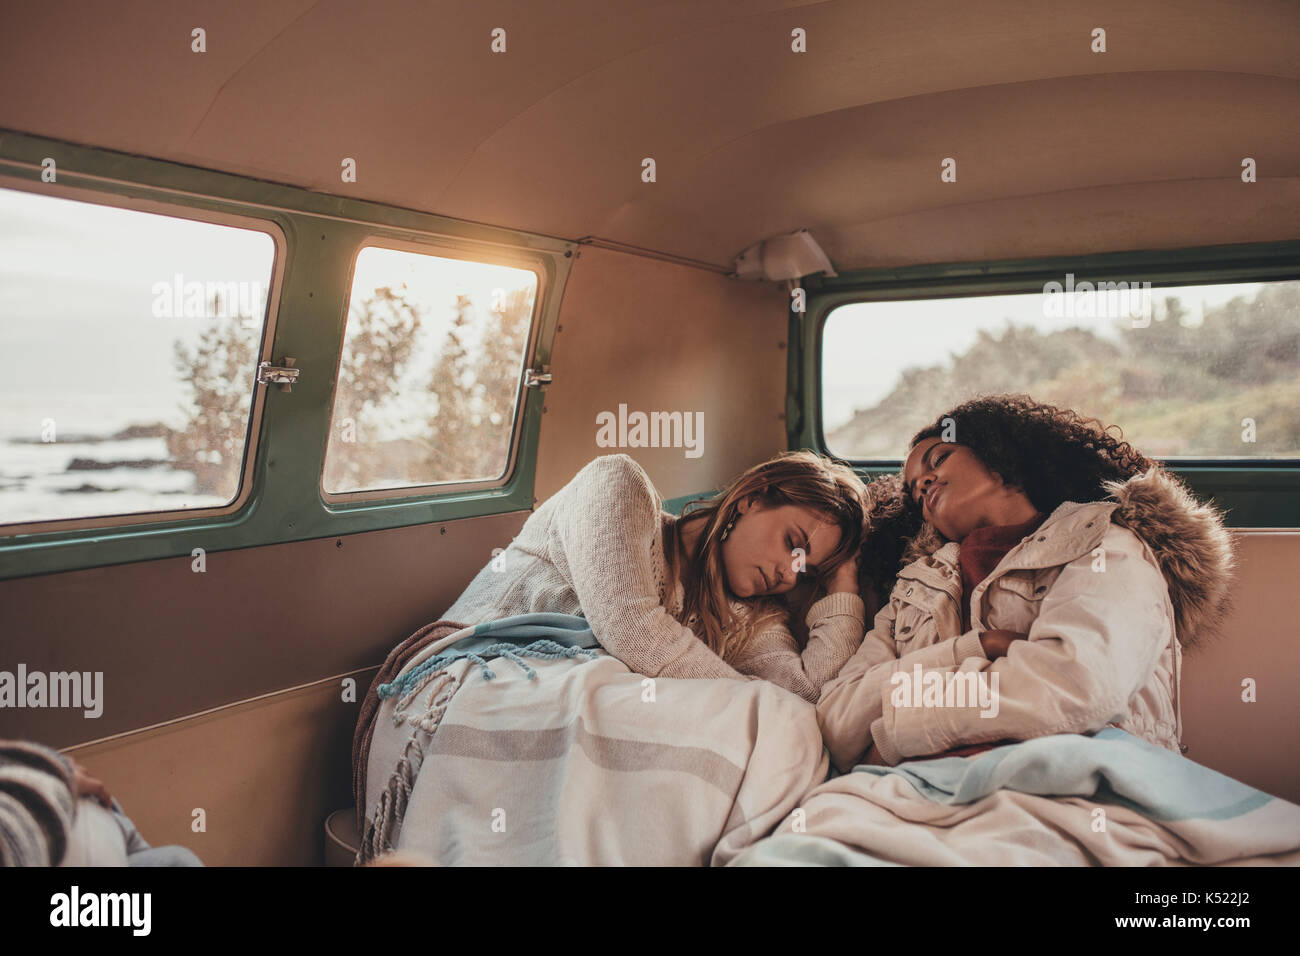 Two women friends on road trip sleeping inside the van. Female friends asleep in back seat of car while travelling. Stock Photo